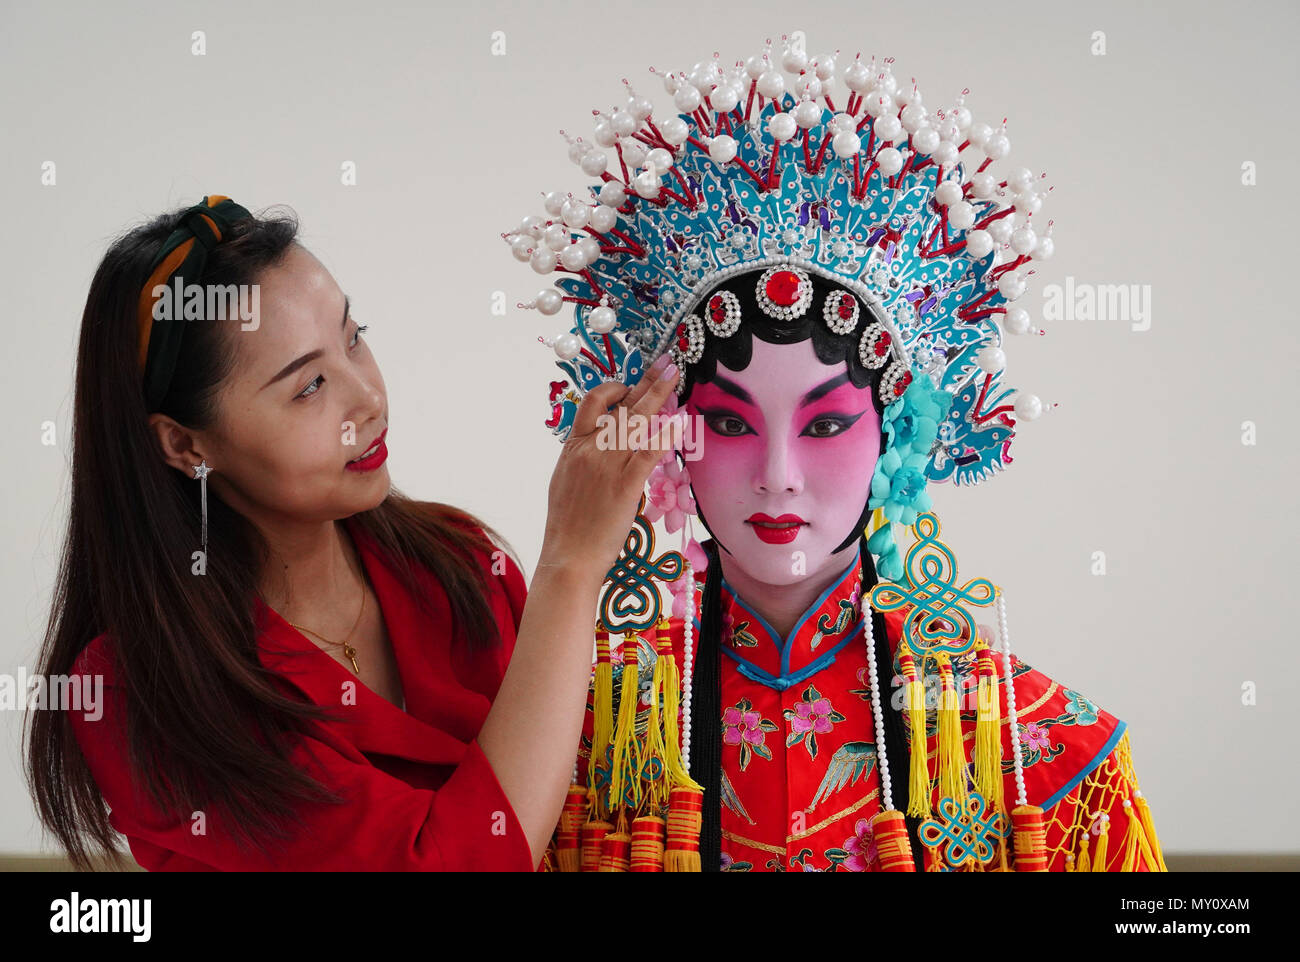 Xi'an, China's Shaanxi Province. 5th June, 2018. Zhang Yuning wears head ornaments guided by Feng Xiaomeng at Northwestern Polytechnical University in Xi'an, capital of northwest China's Shaanxi Province, June 5, 2018. The university started running courses of Peking Opera in September last year to promote traditional opera among students. Peking Opera, listed by UNESCO as an intangible cultural heritage, is the most famous among hundreds of forms of local opera in China. Credit: Shao Rui/Xinhua/Alamy Live News Stock Photo